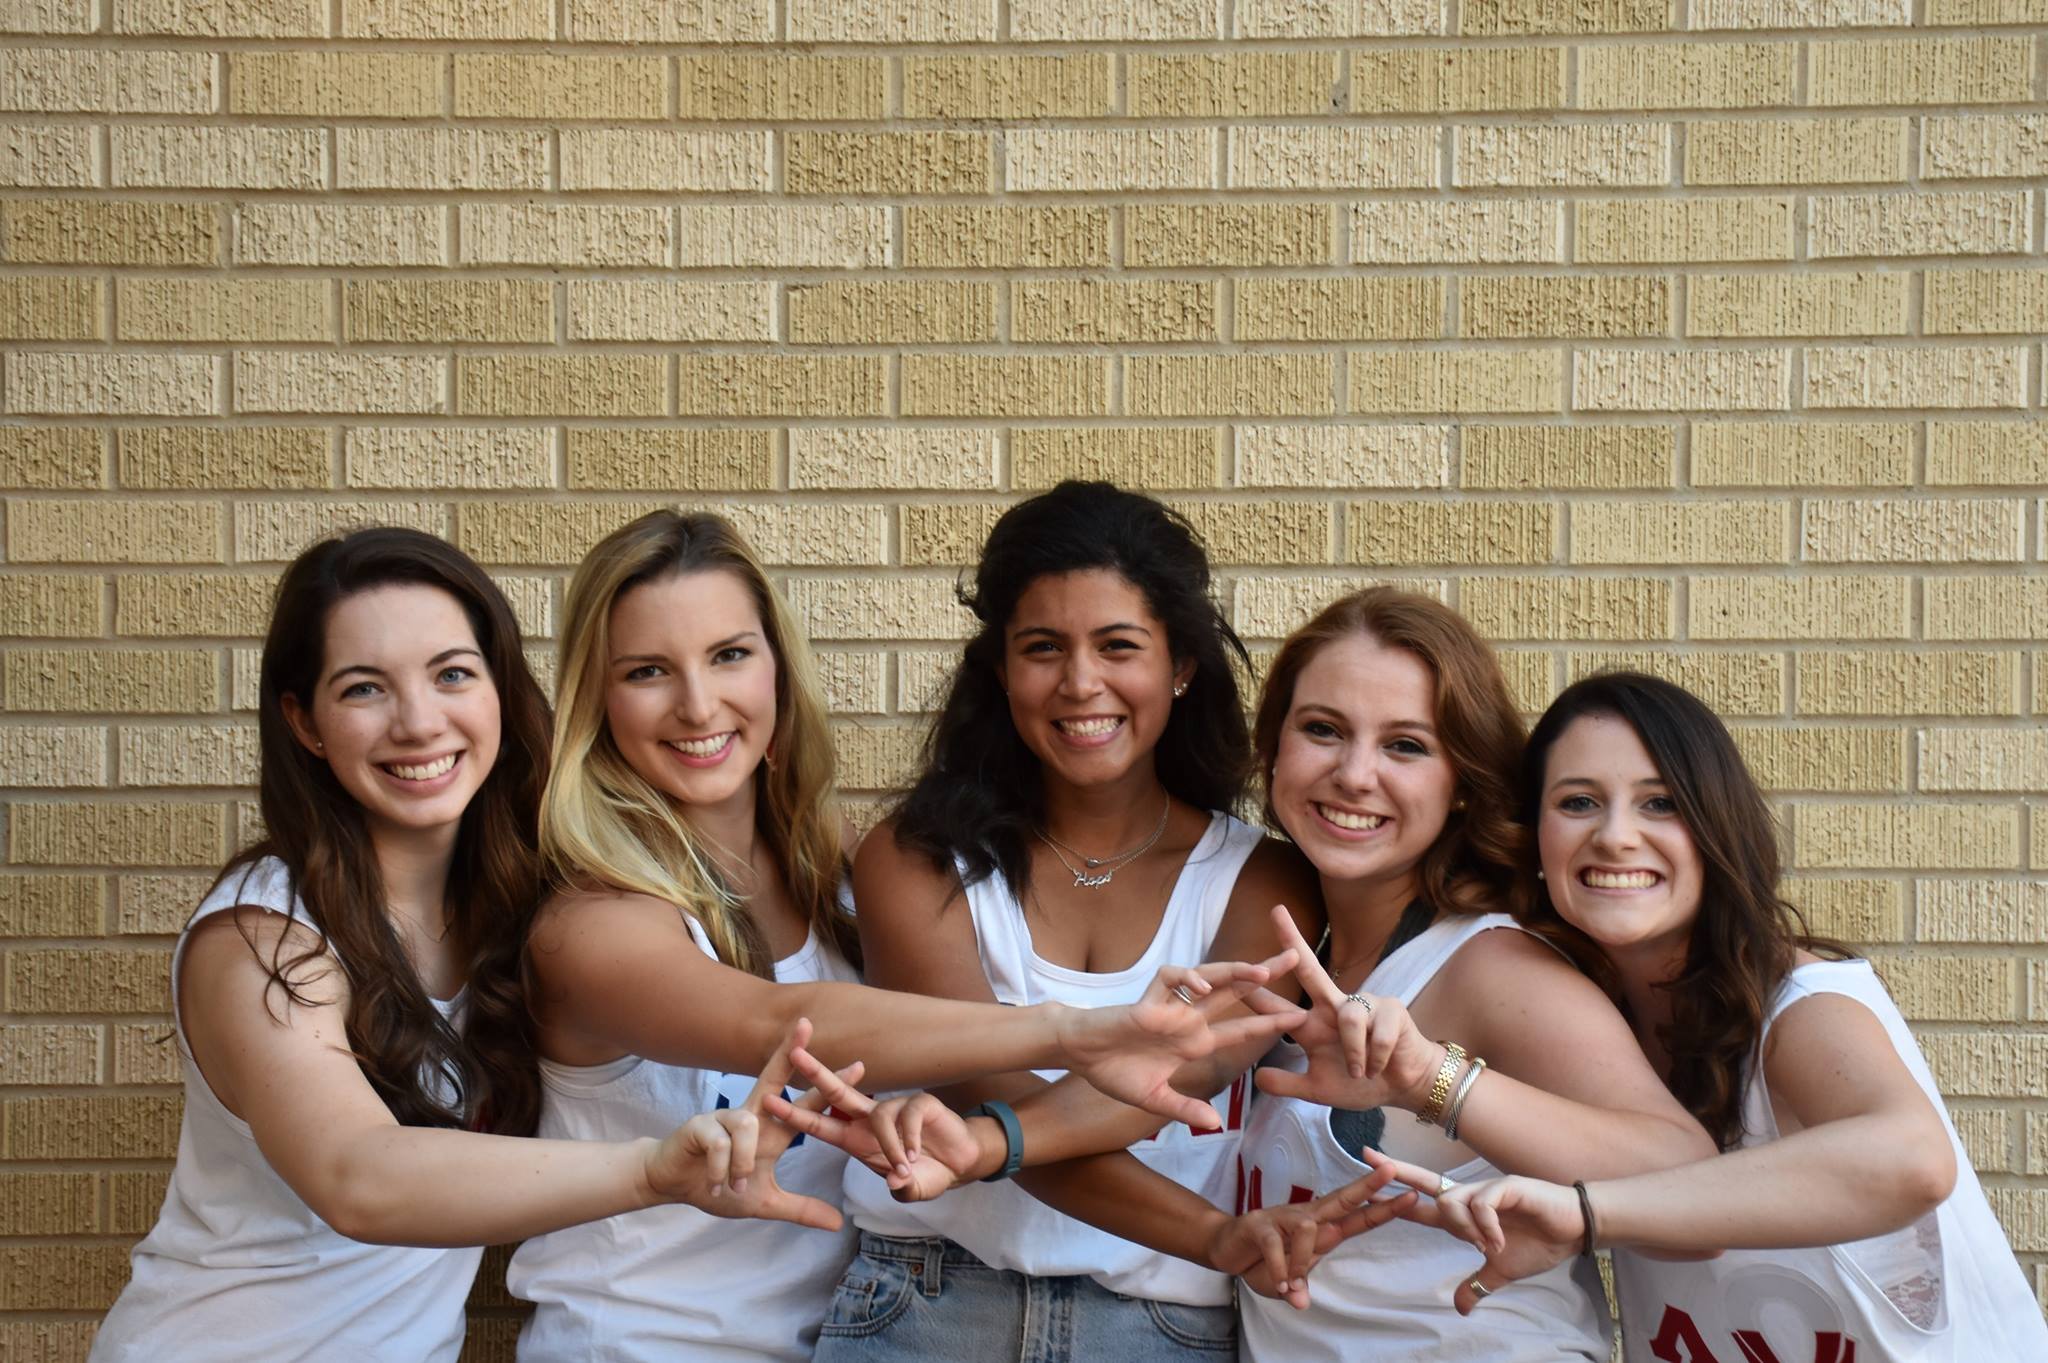 Tew pictured with her Alpha Chi Sorority sisters including her “Little” Shelly Laroche (far right.)